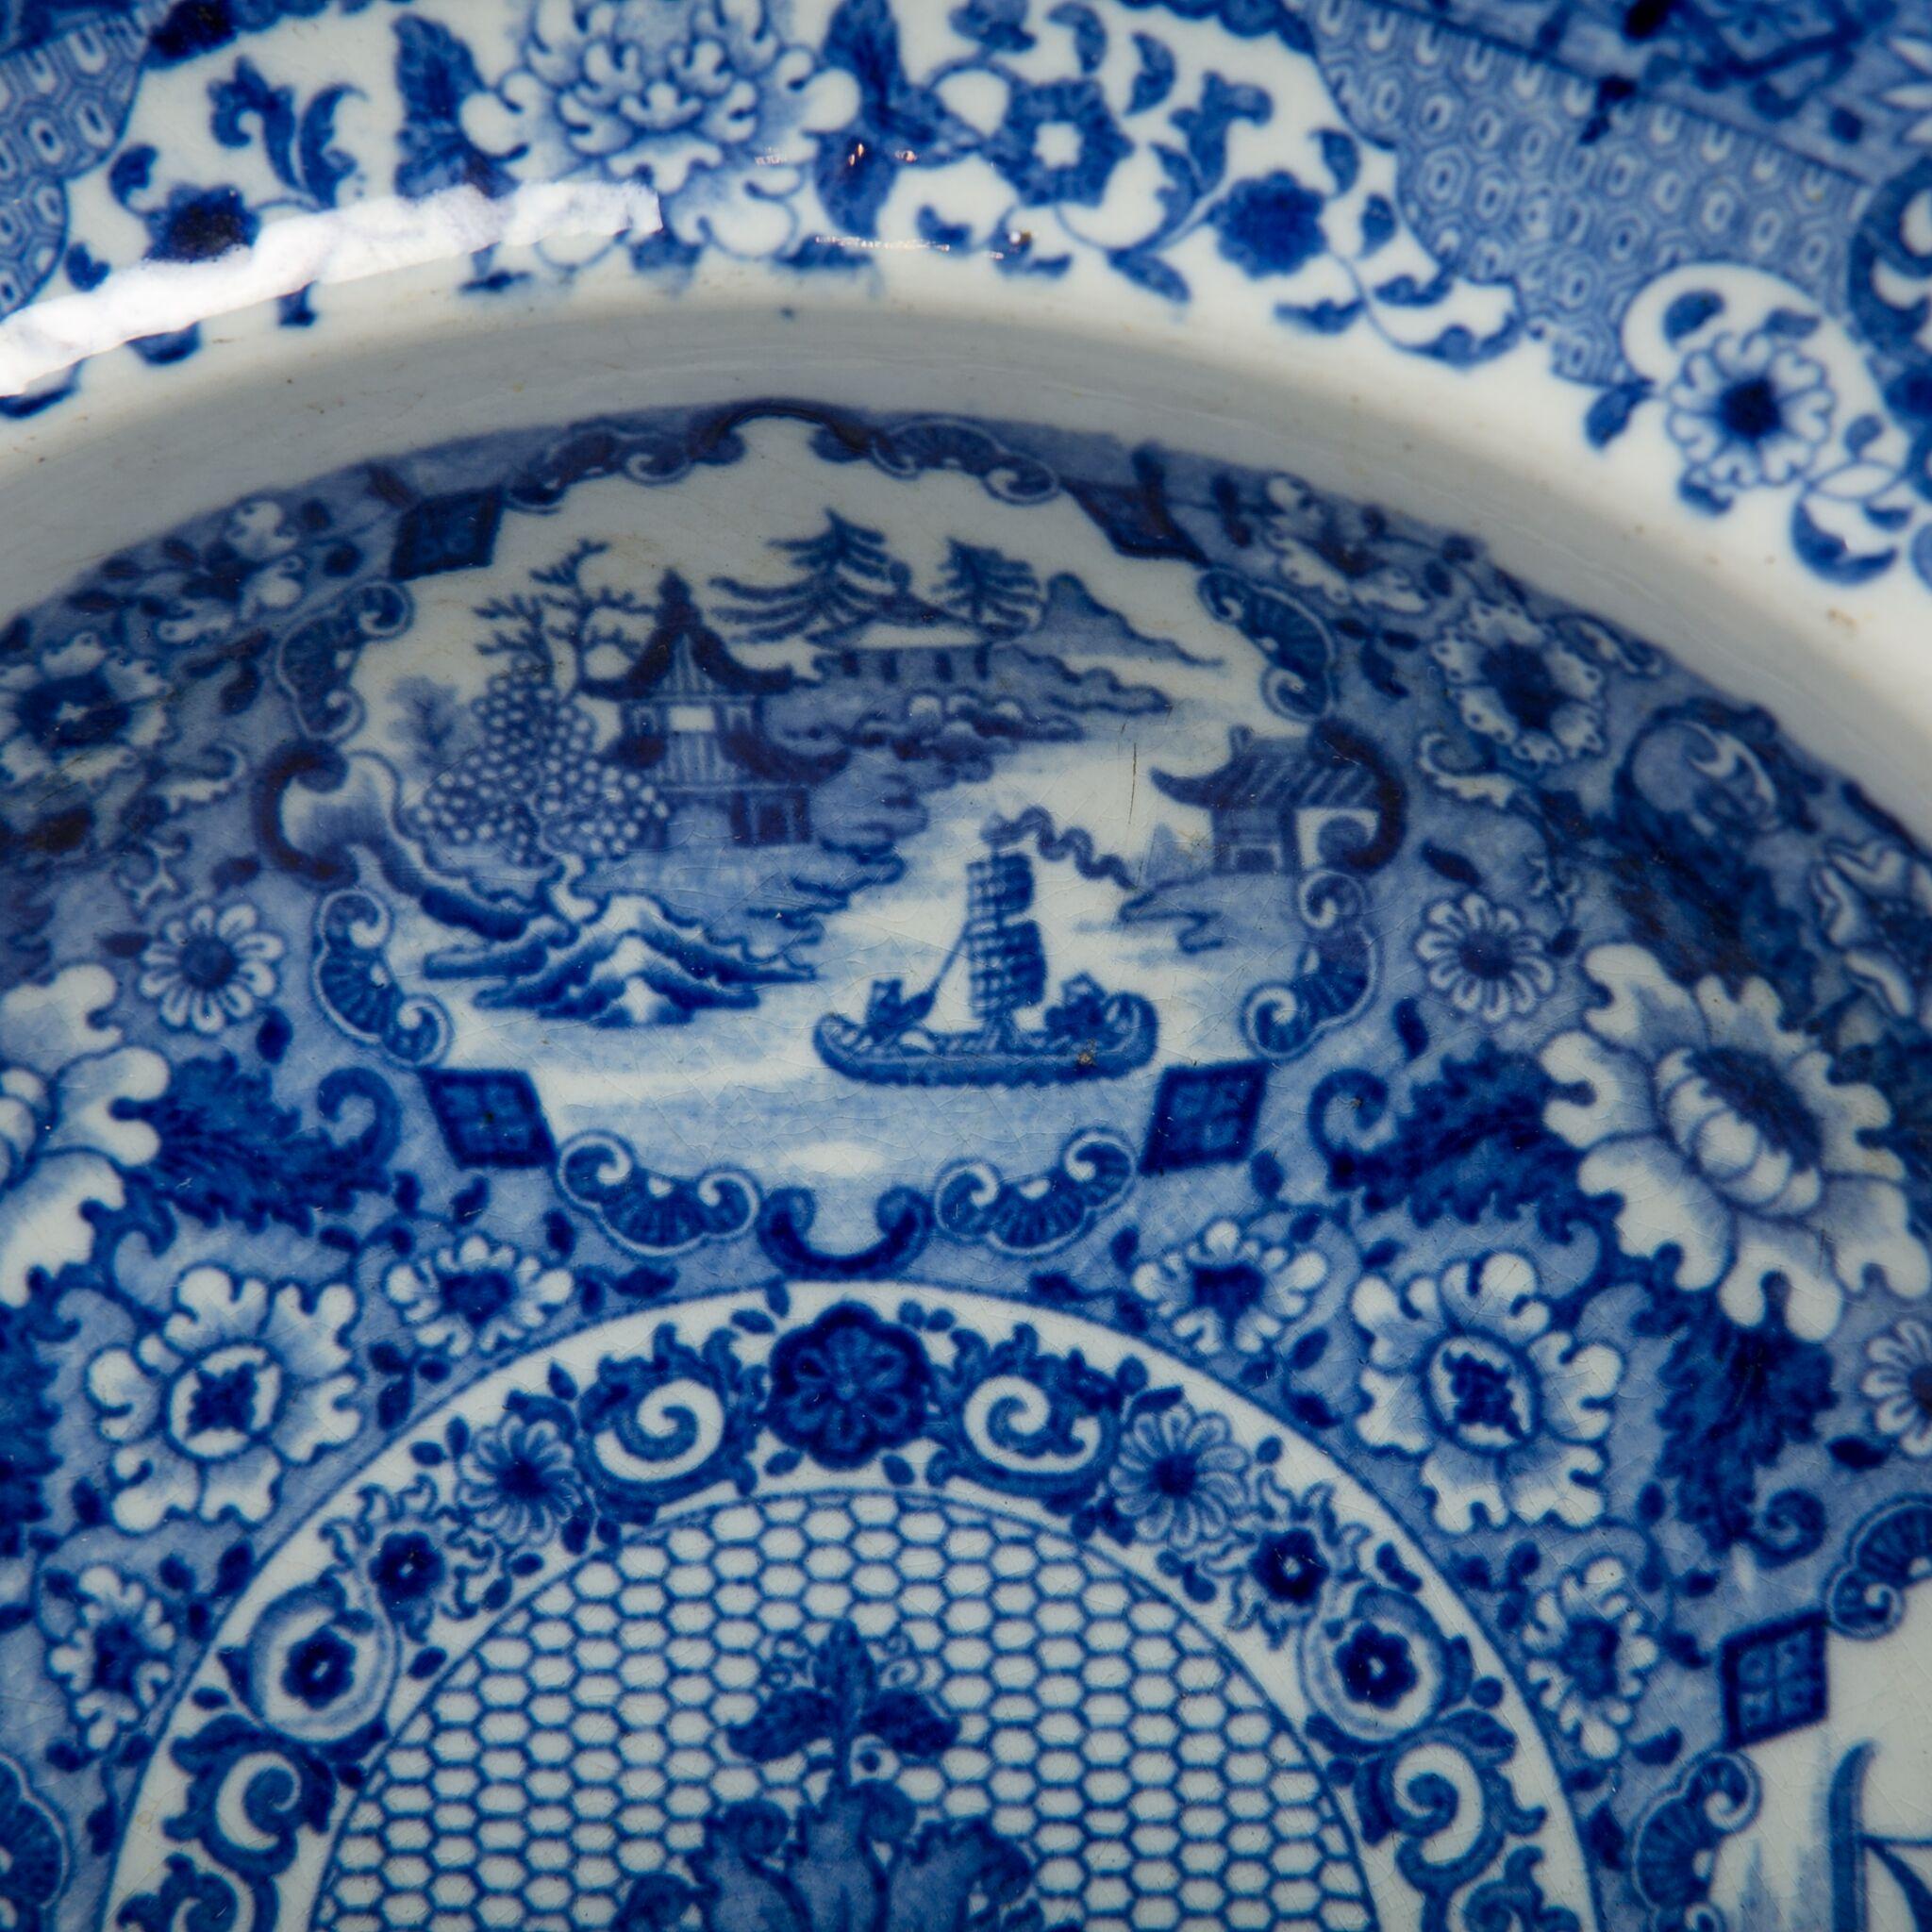 blue and white dishes made in england